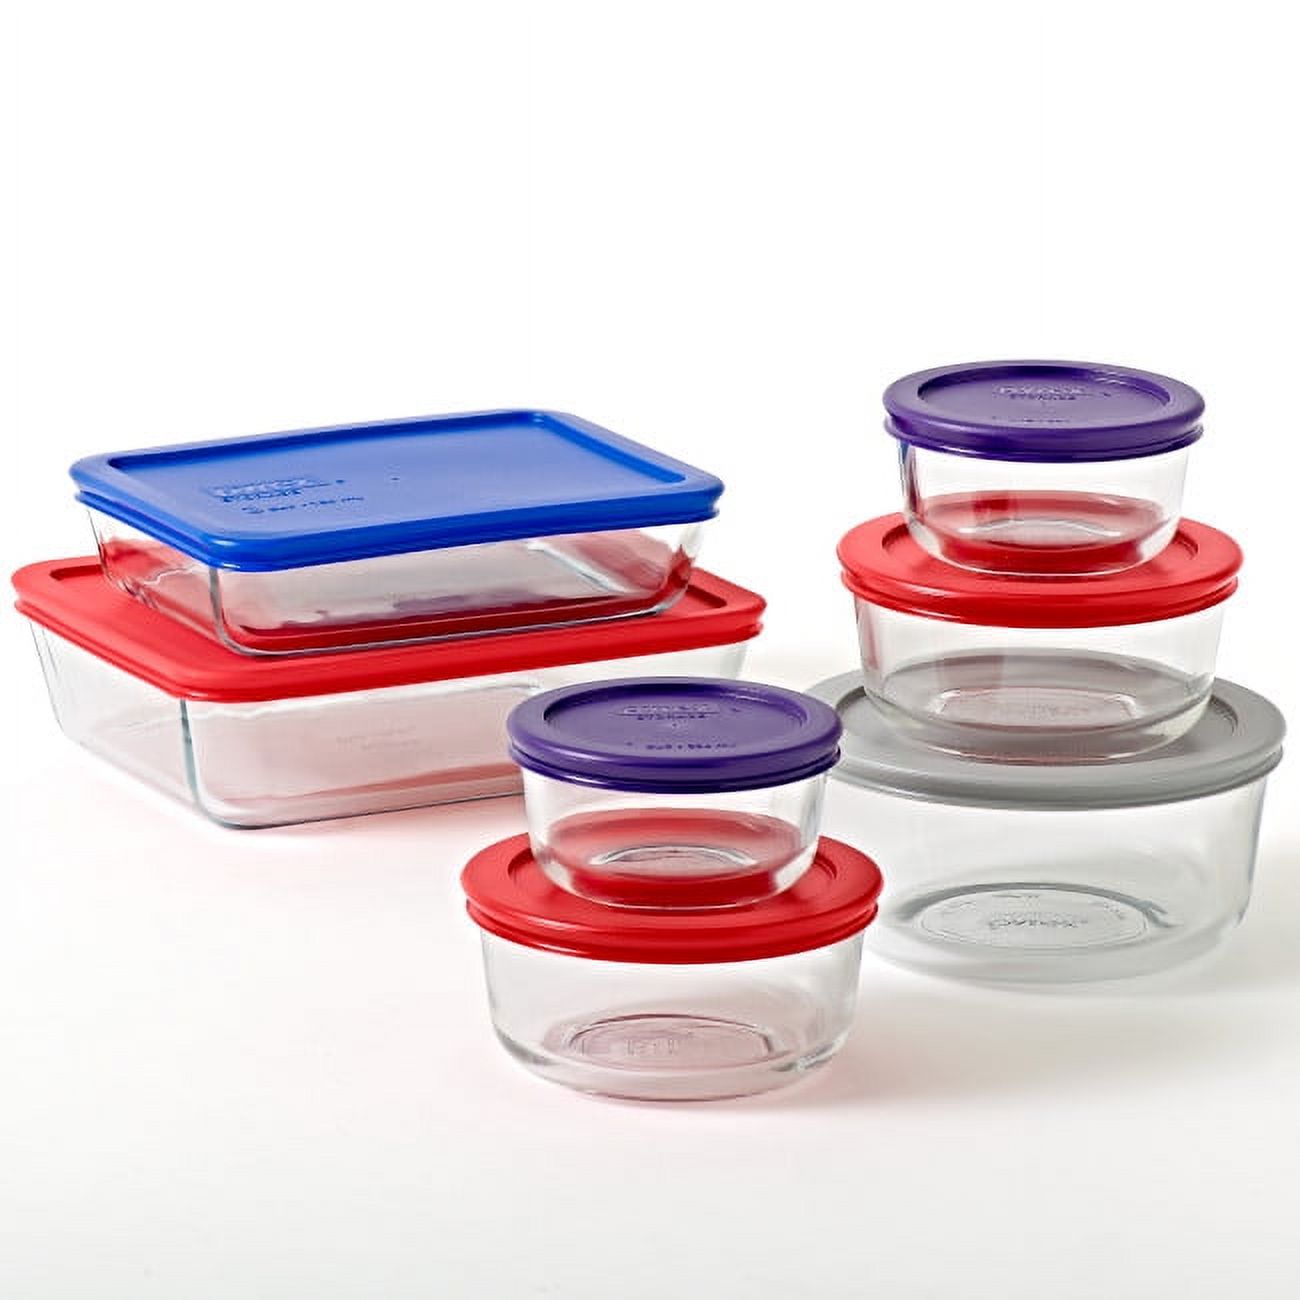 Pyrex Simply Store Glass Storage Container Set with Lids, 14 Piece - image 1 of 8